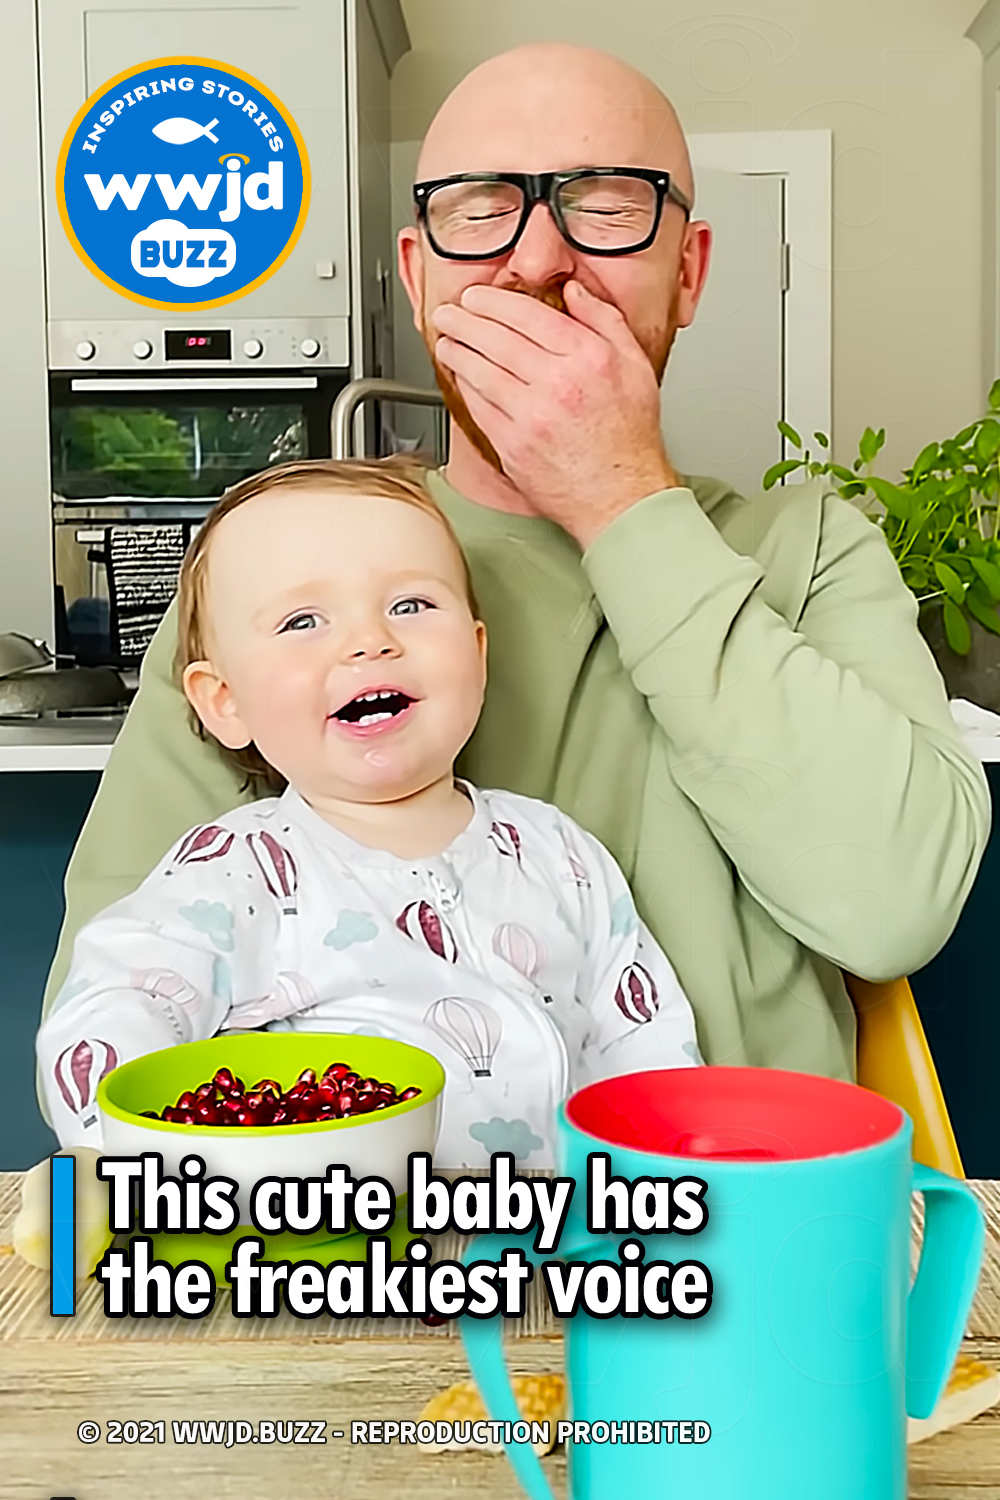 This cute baby has the freakiest voice